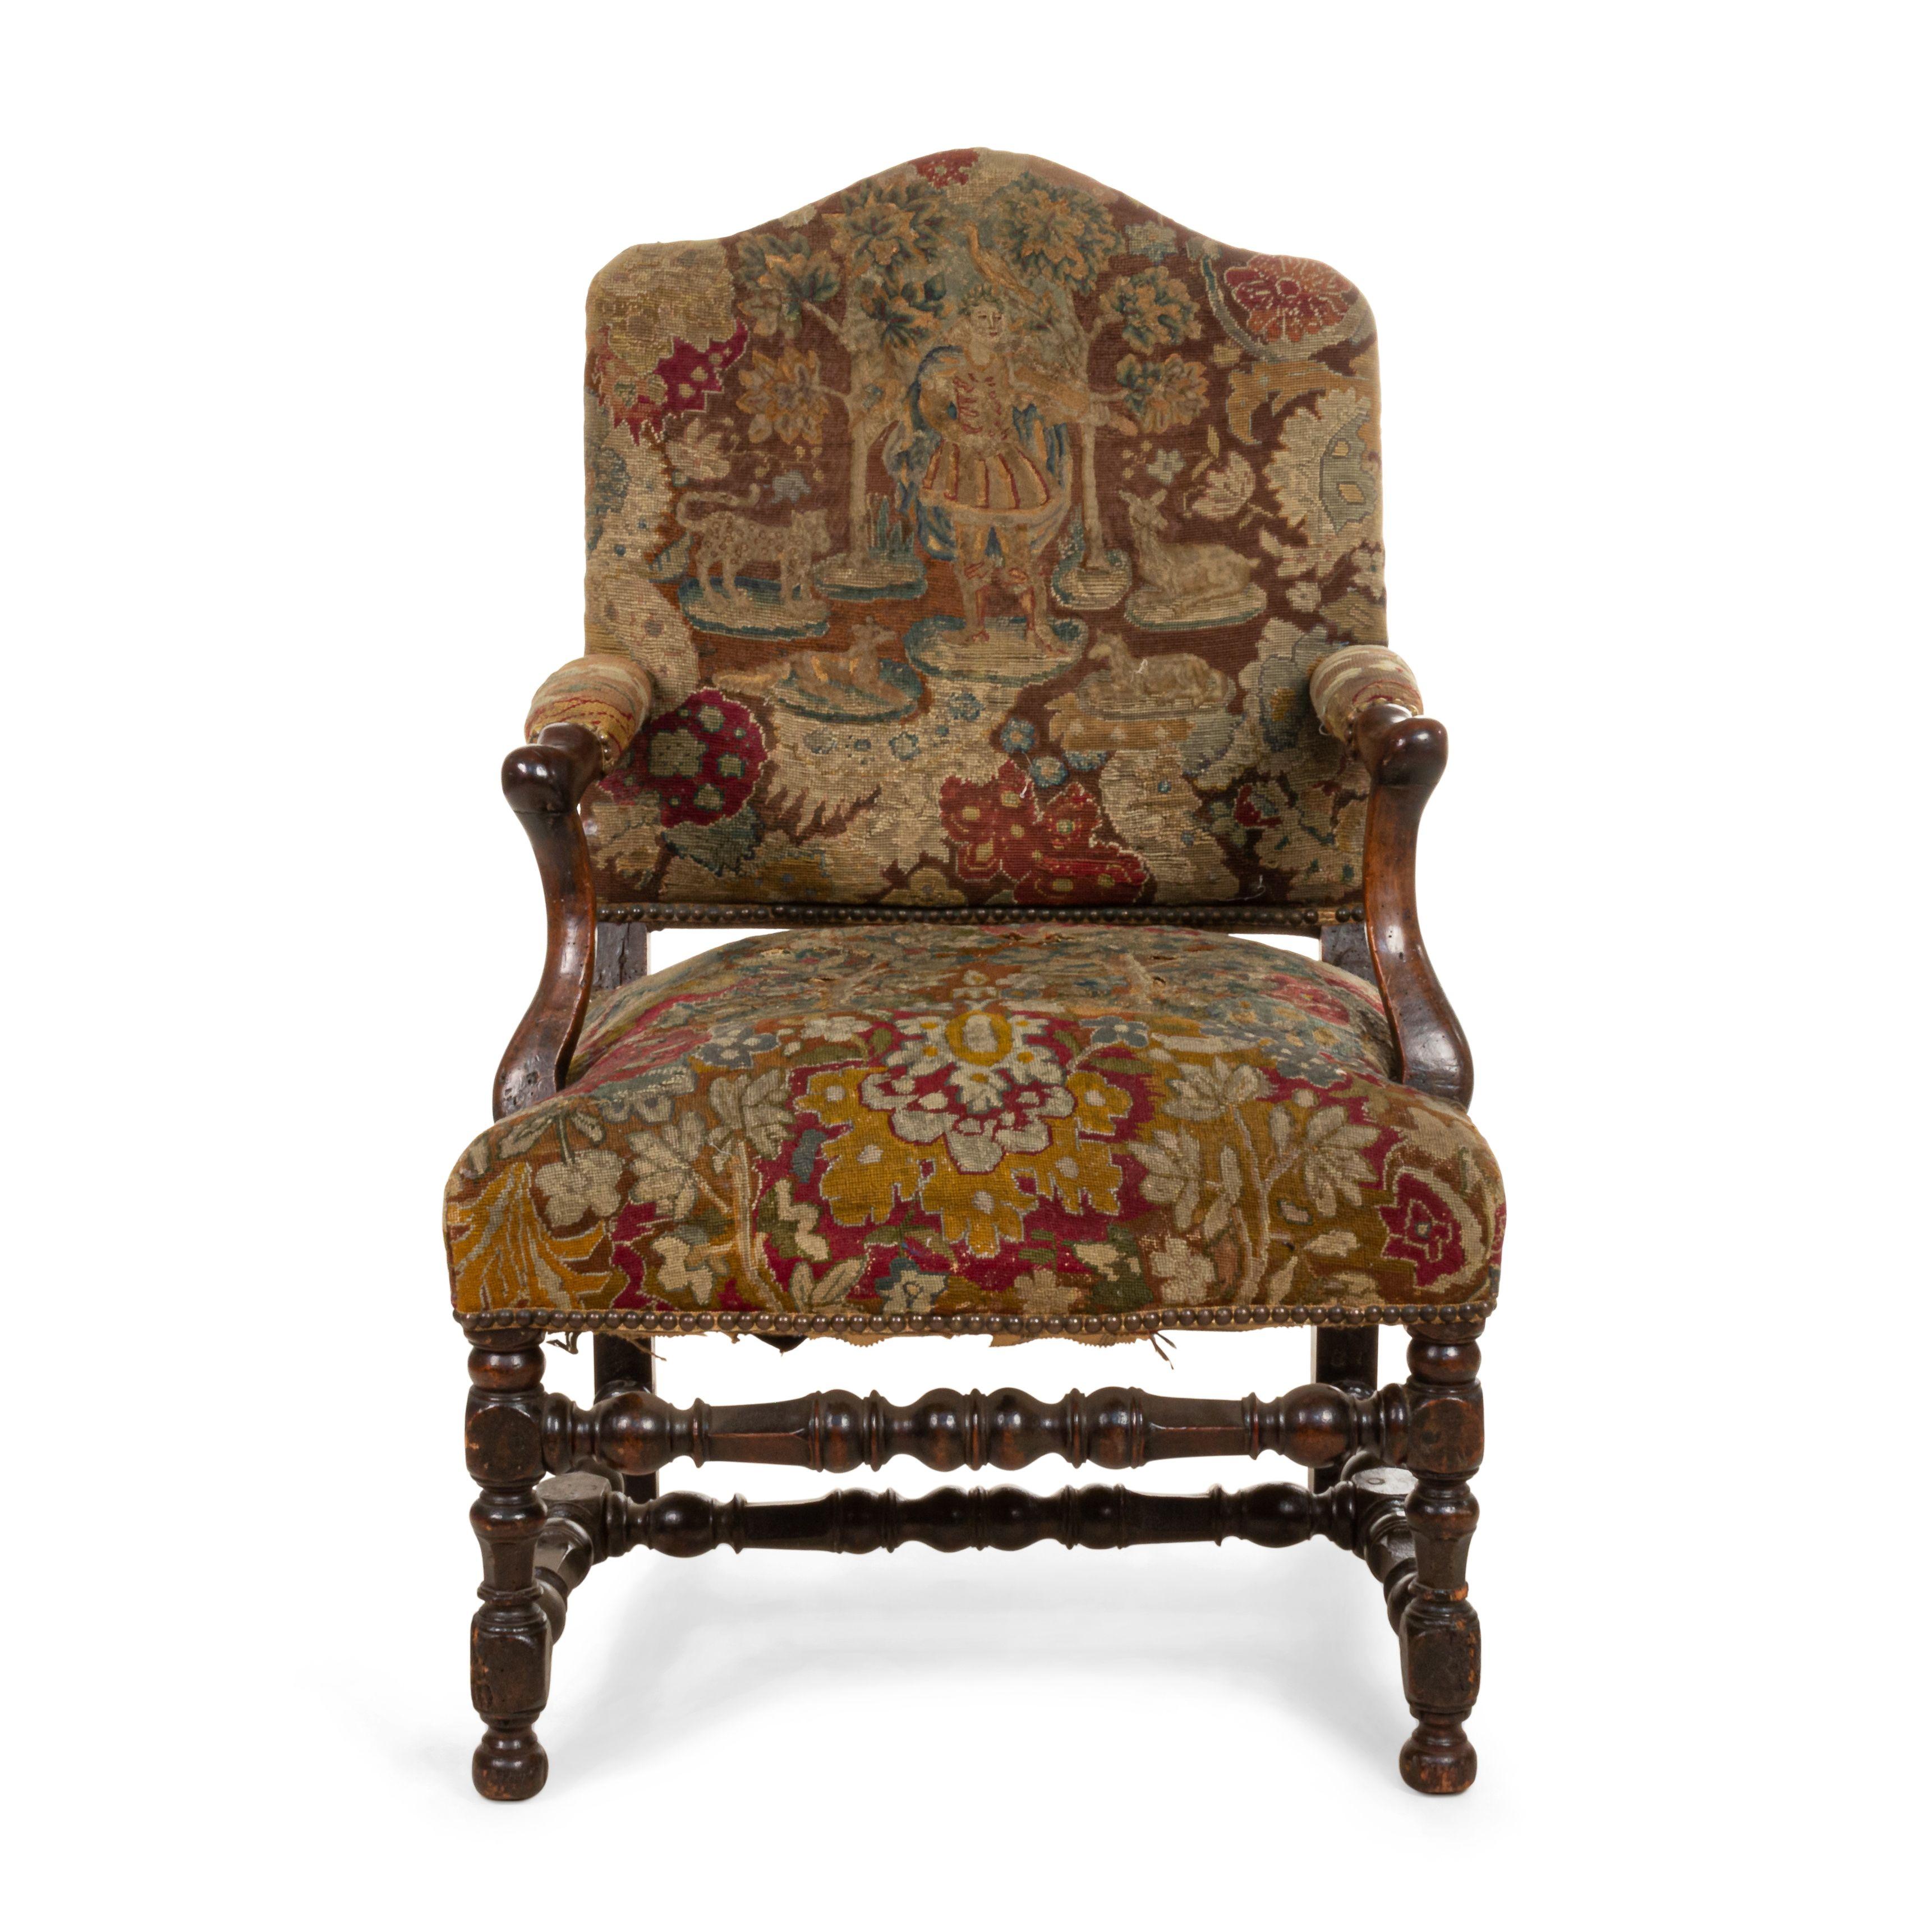 French Provincial (18th century) walnut open armchair with needlepoint upholstery and turned legs and stretcher.